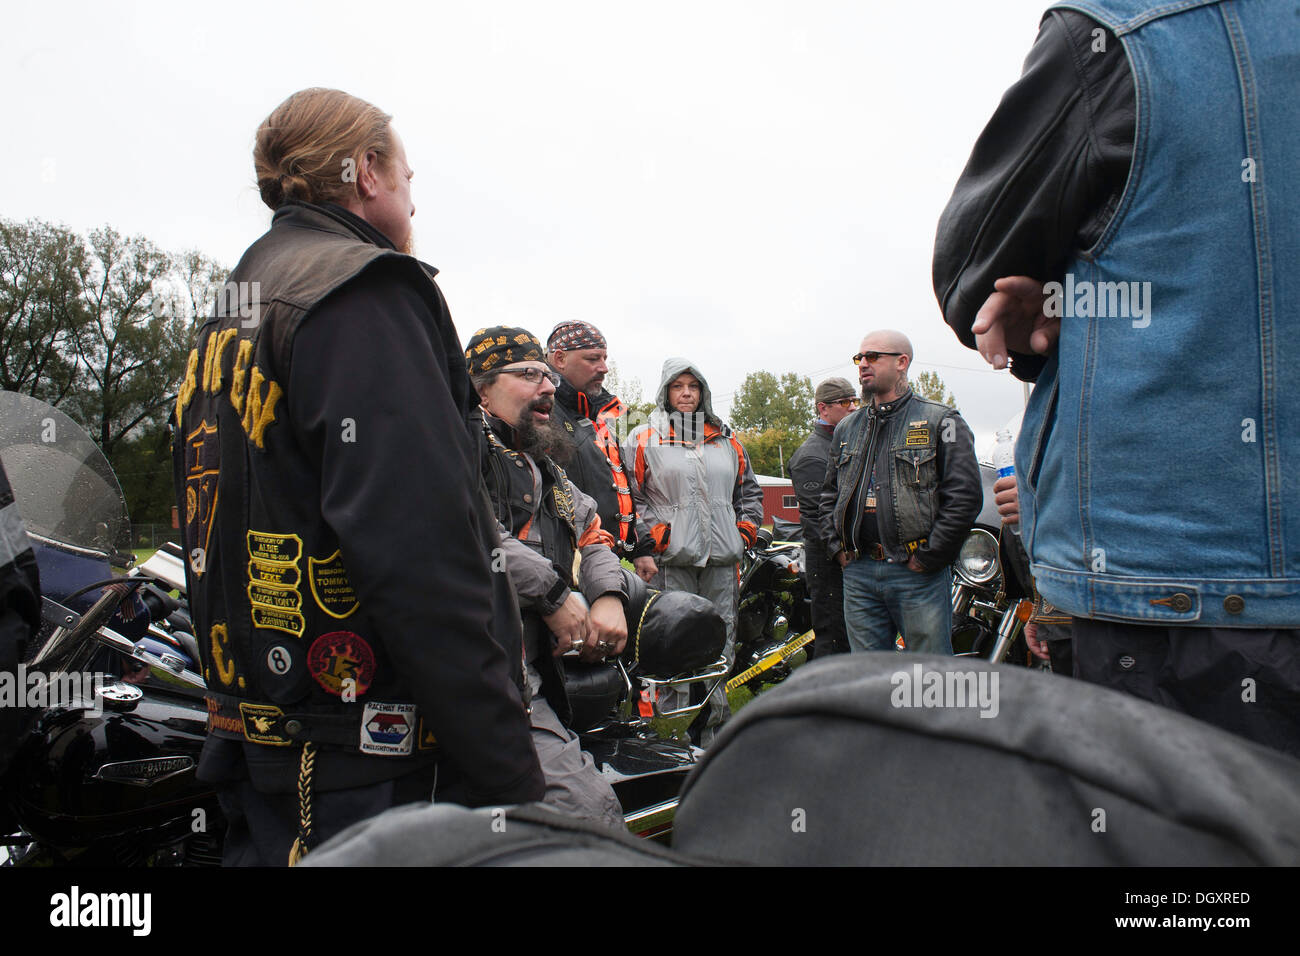 Motorcycle riders wait for the start of the annual autumn charity ride in Adams Massachusetts. Stock Photo